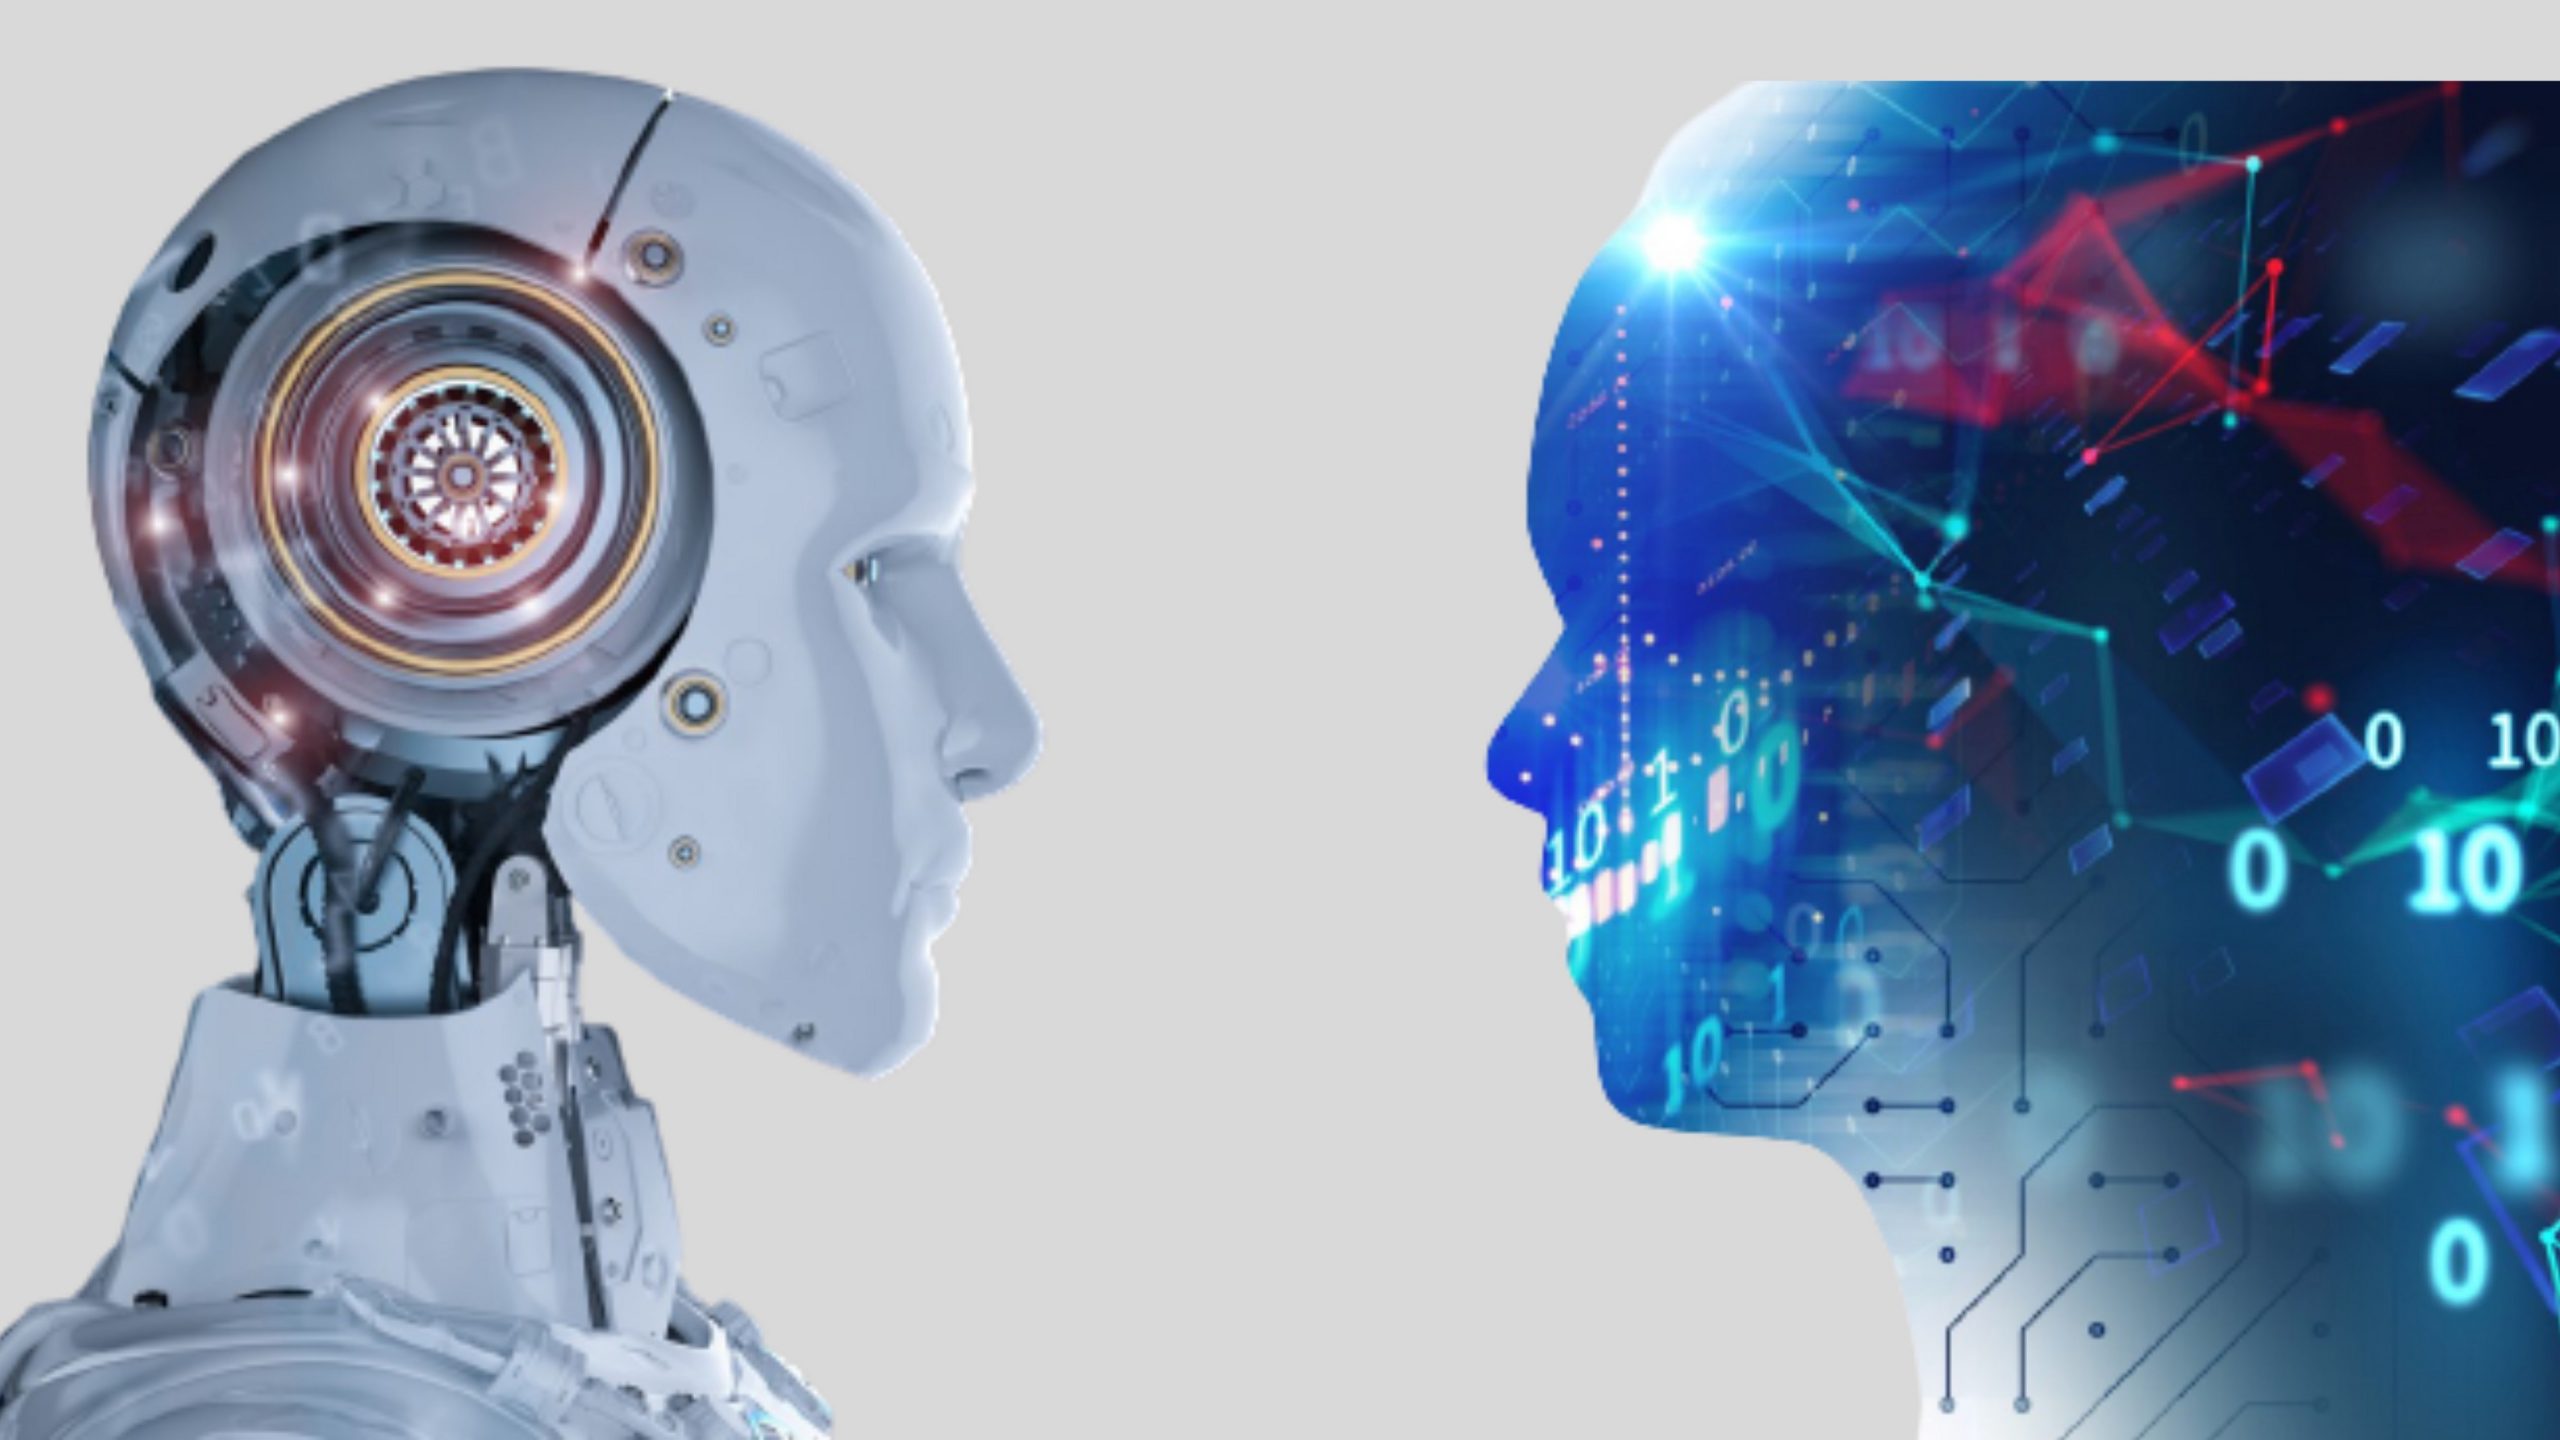 An Investigation of the Artificial Intelligence, Robotics & Data Science degrees offered Online through the University of Applied Sciences (IUBH), Germany